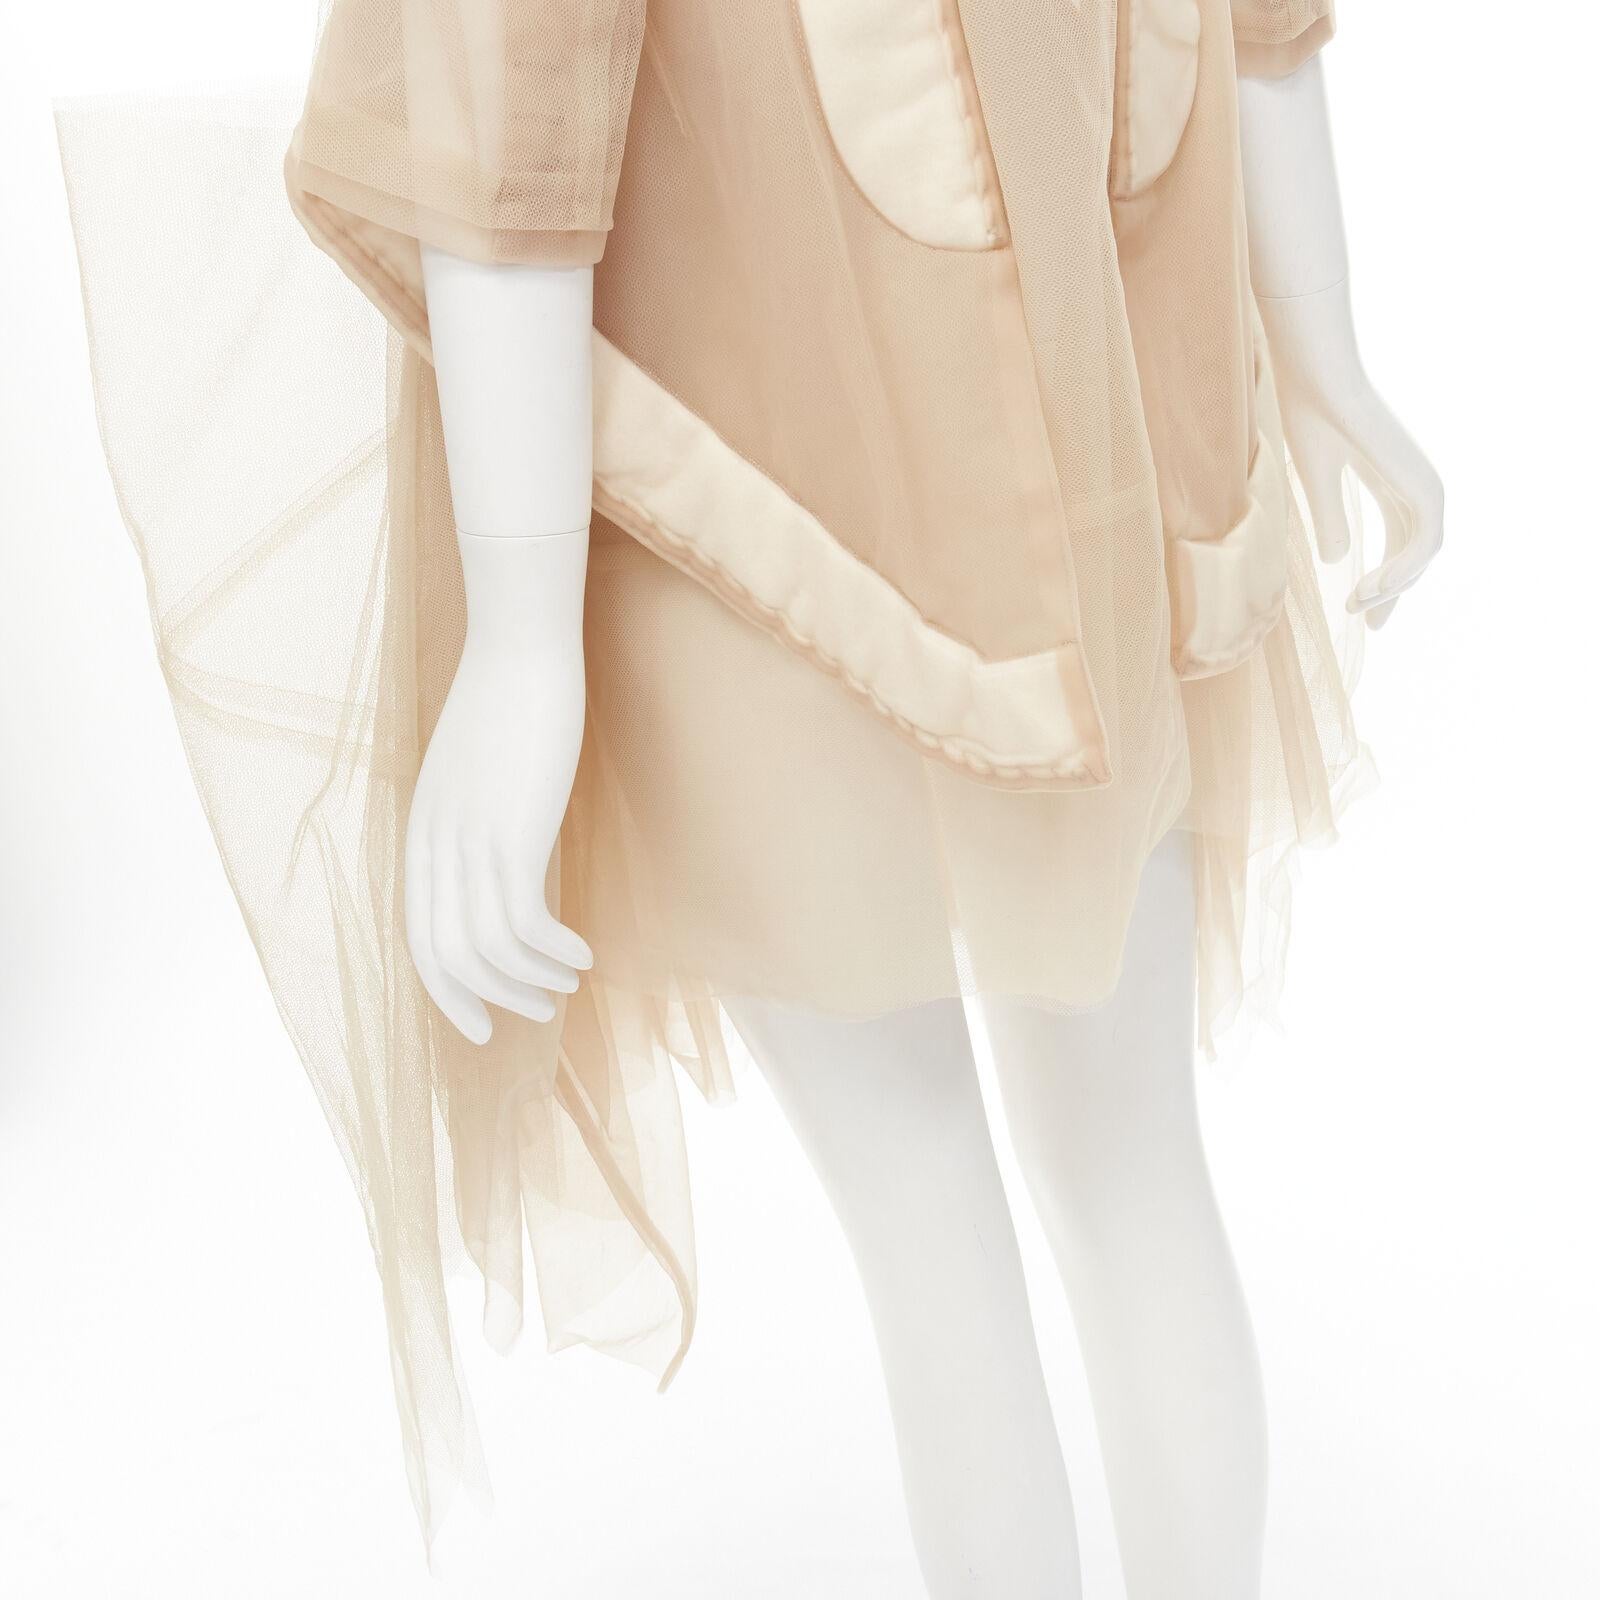 rare COMME DES GARCONS 2009 Runway nude inside out sheer tulle long jacket XS
Reference: CRTI/A00744
Brand: Comme Des Garcons
Designer: Rei Kawakubo
Collection: 2009 - Runway
Material: Nylon
Color: Nude, White
Pattern: Solid
Closure: Button
Lining: